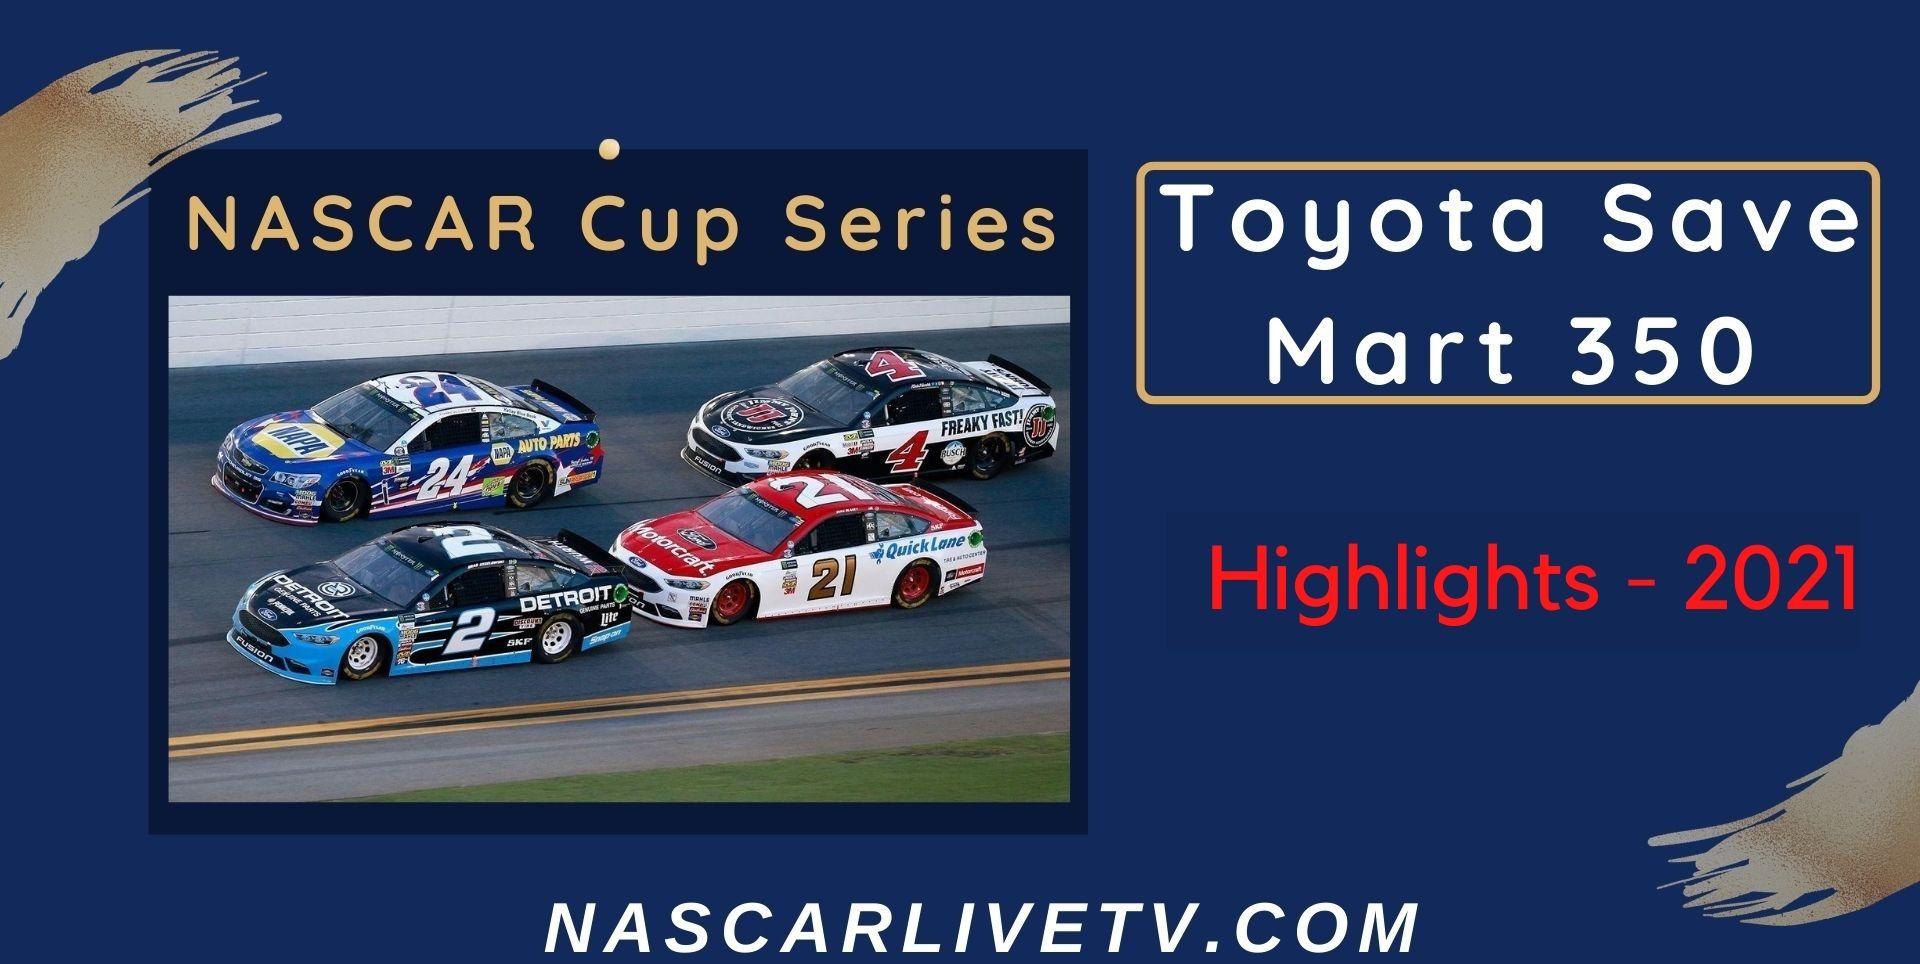 Toyota Save Mart 350 Highlights NASCAR Cup Series 2021